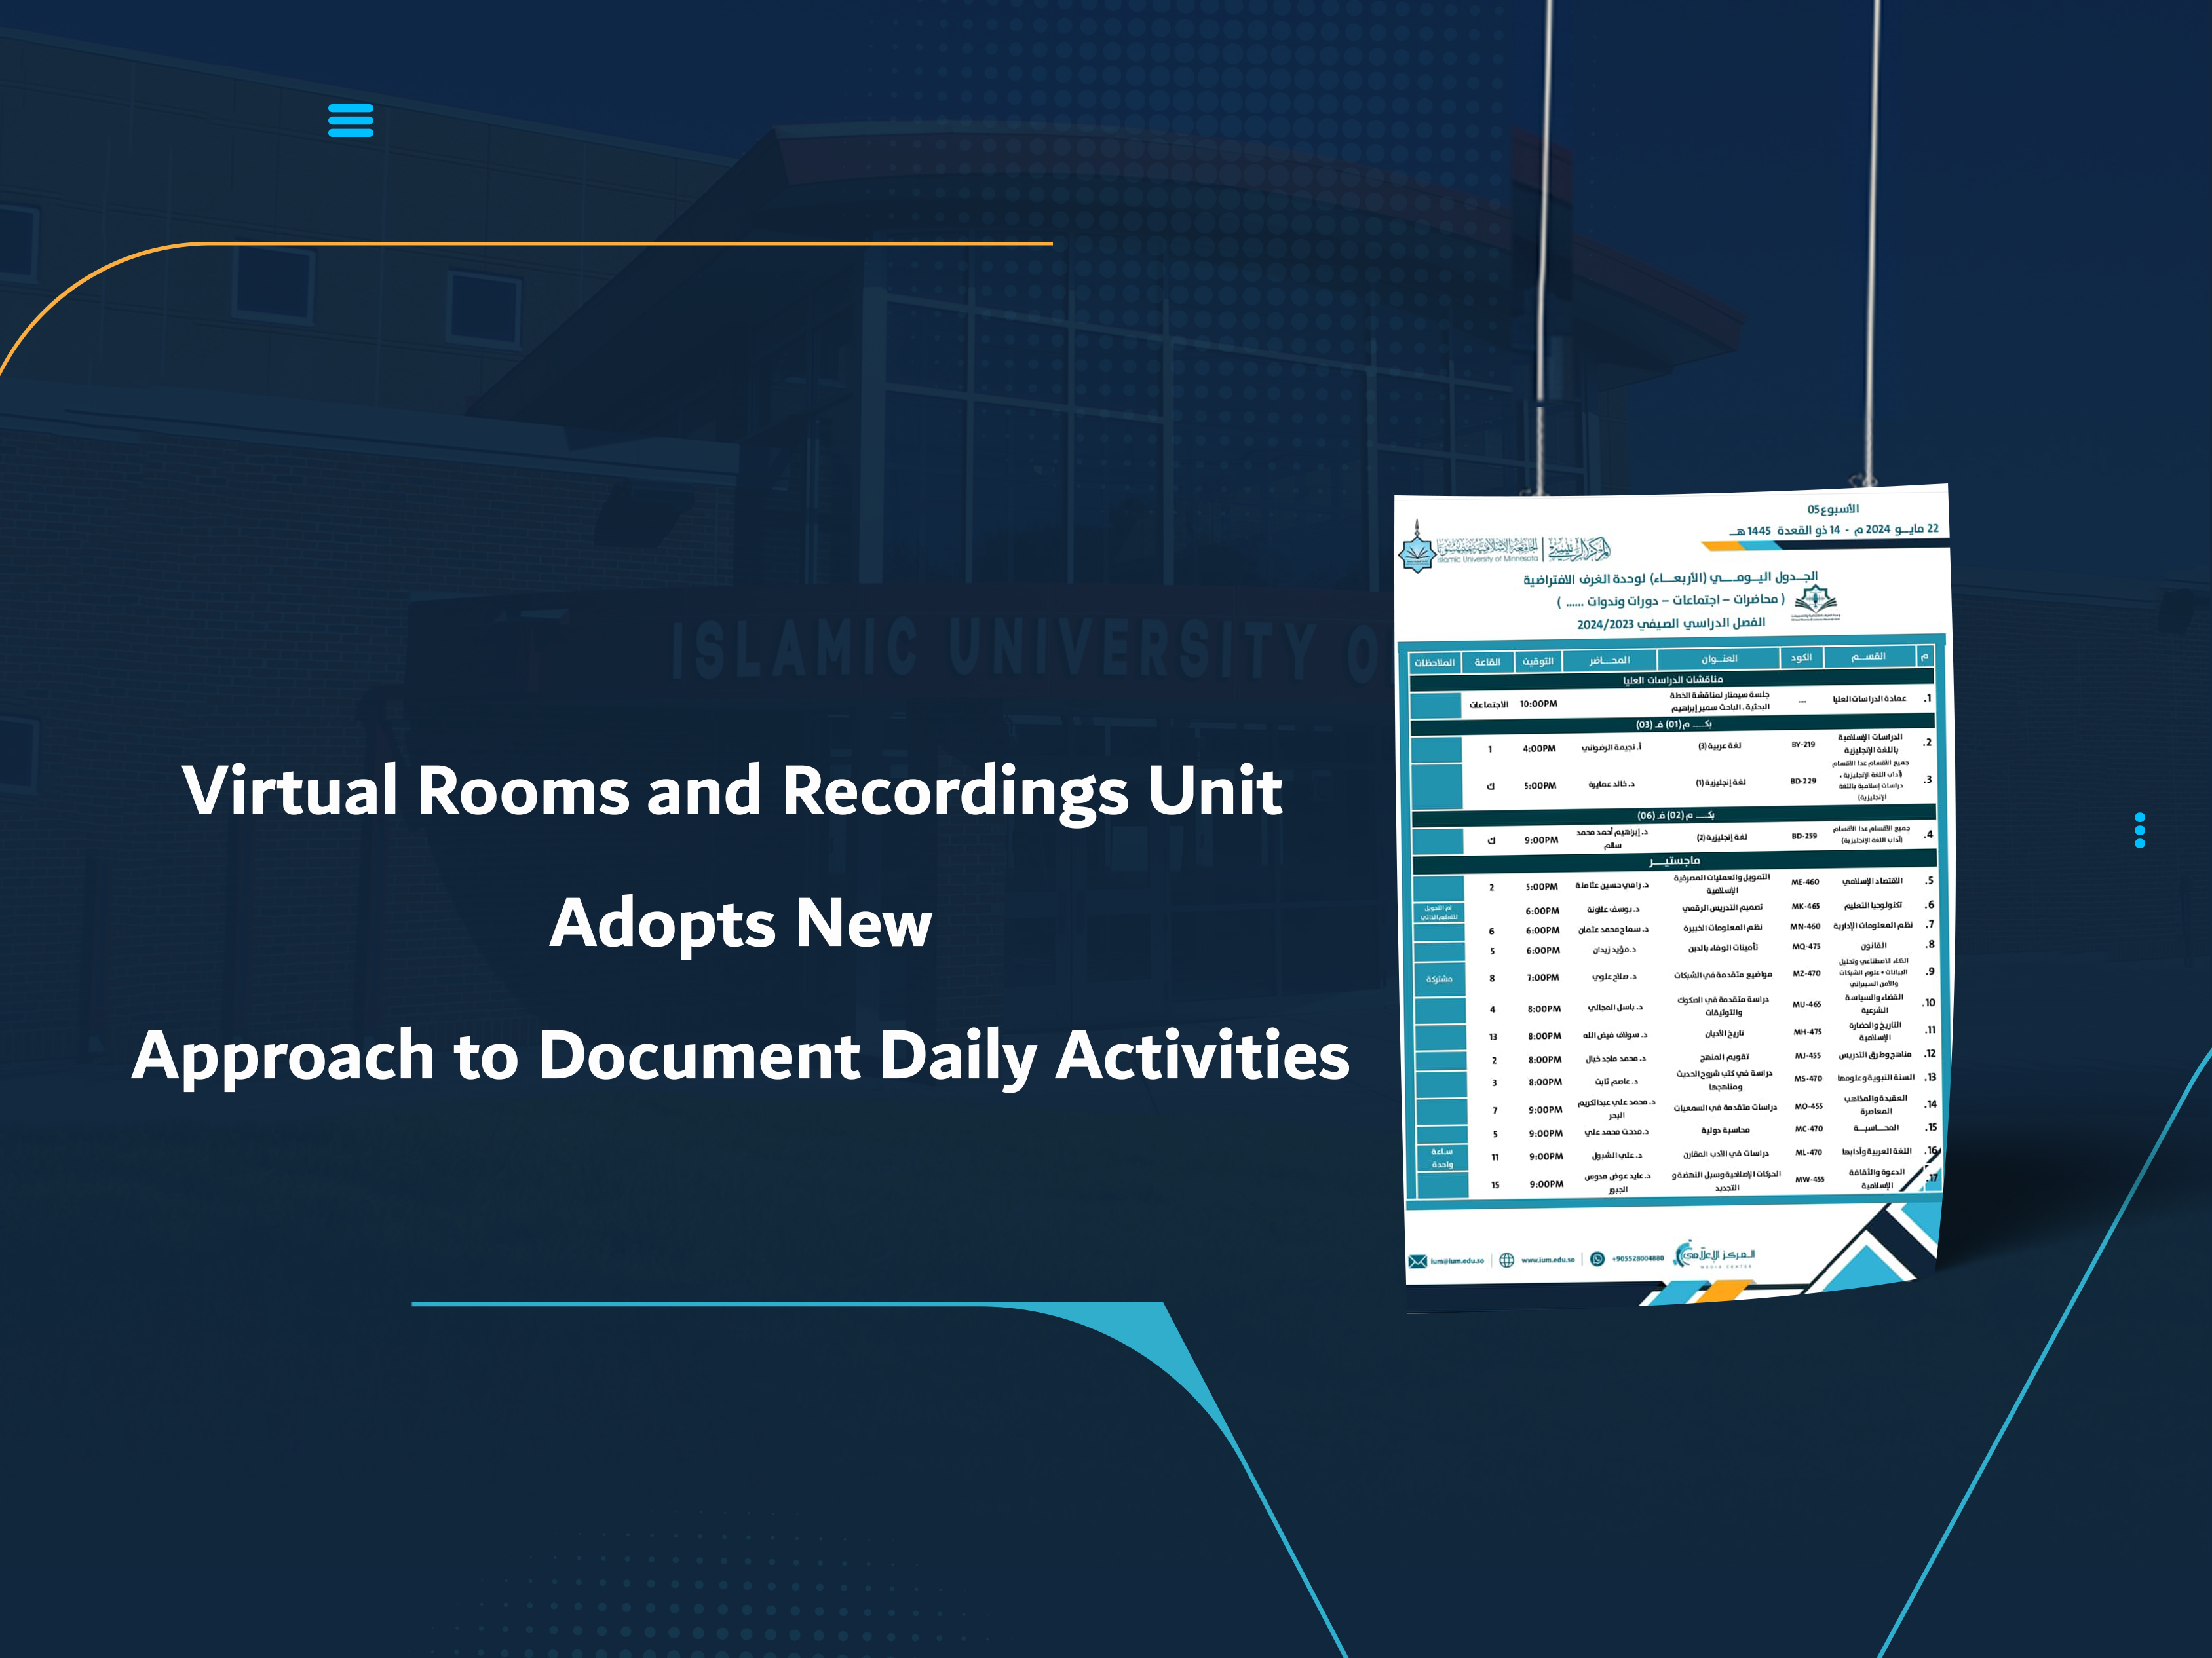 Virtual Rooms and Recordings Unit Adopts New Approach to Document Daily Activities